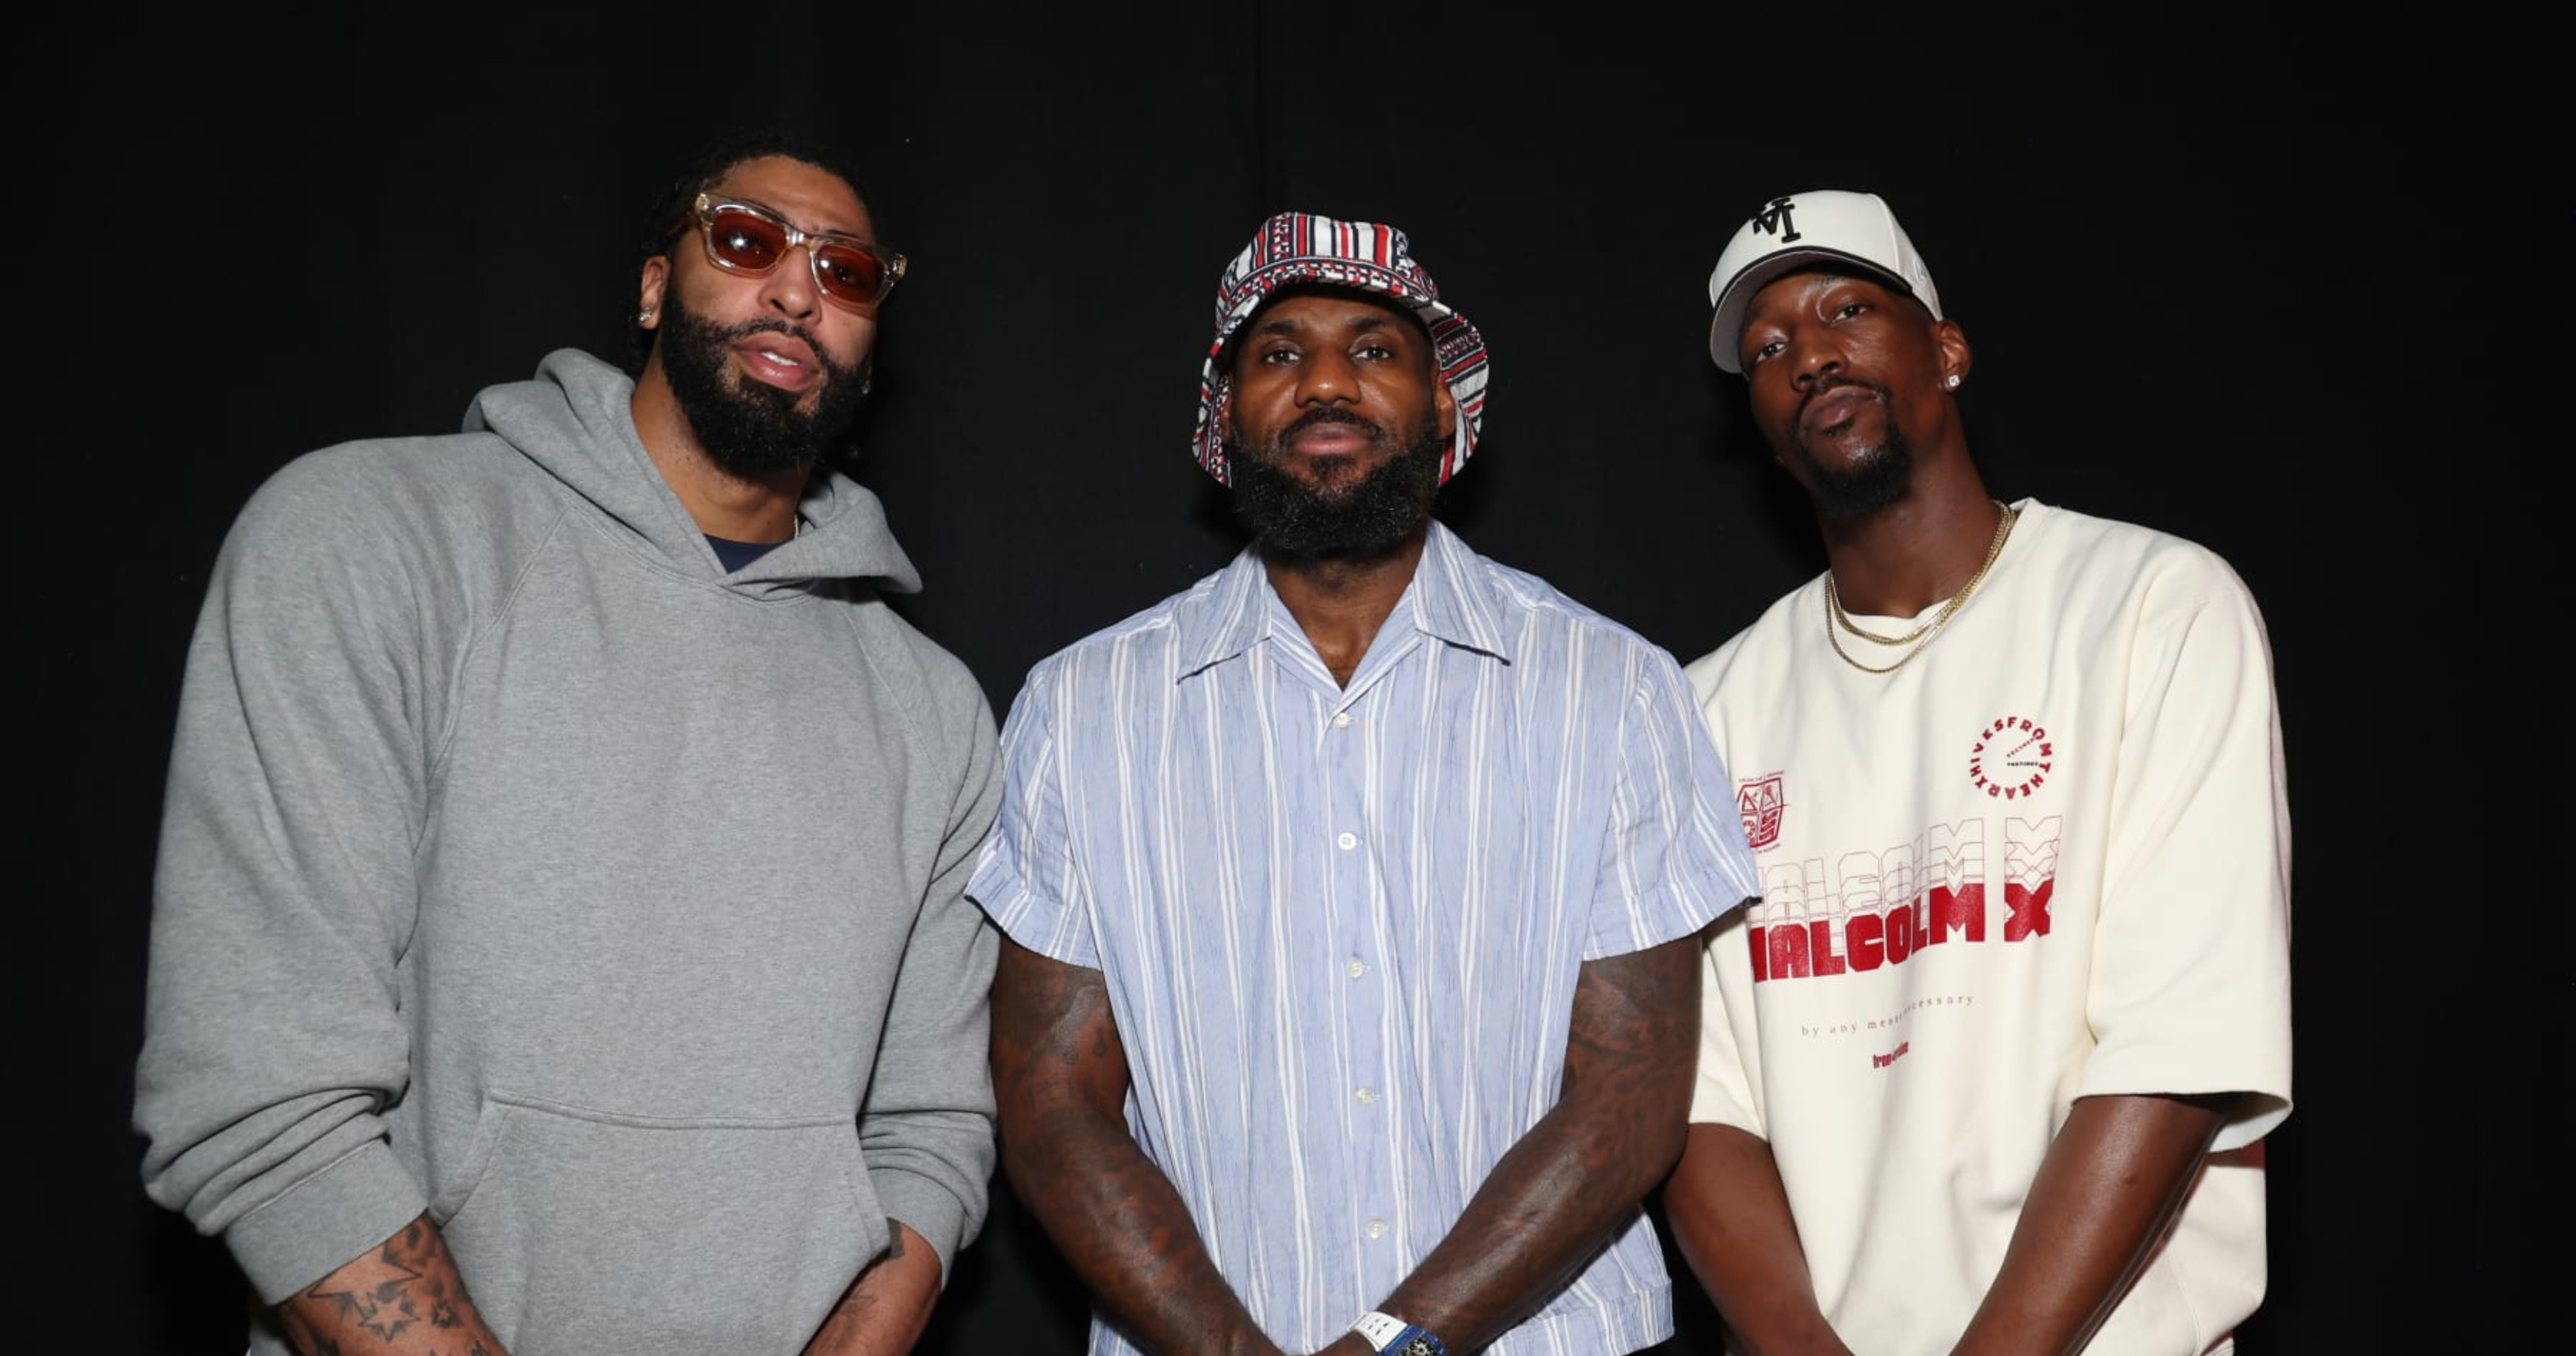 Photos: Lakers’ LeBron James, More Attend Party for Snoop Dogg, Dr. Dre’s Gin & Juice